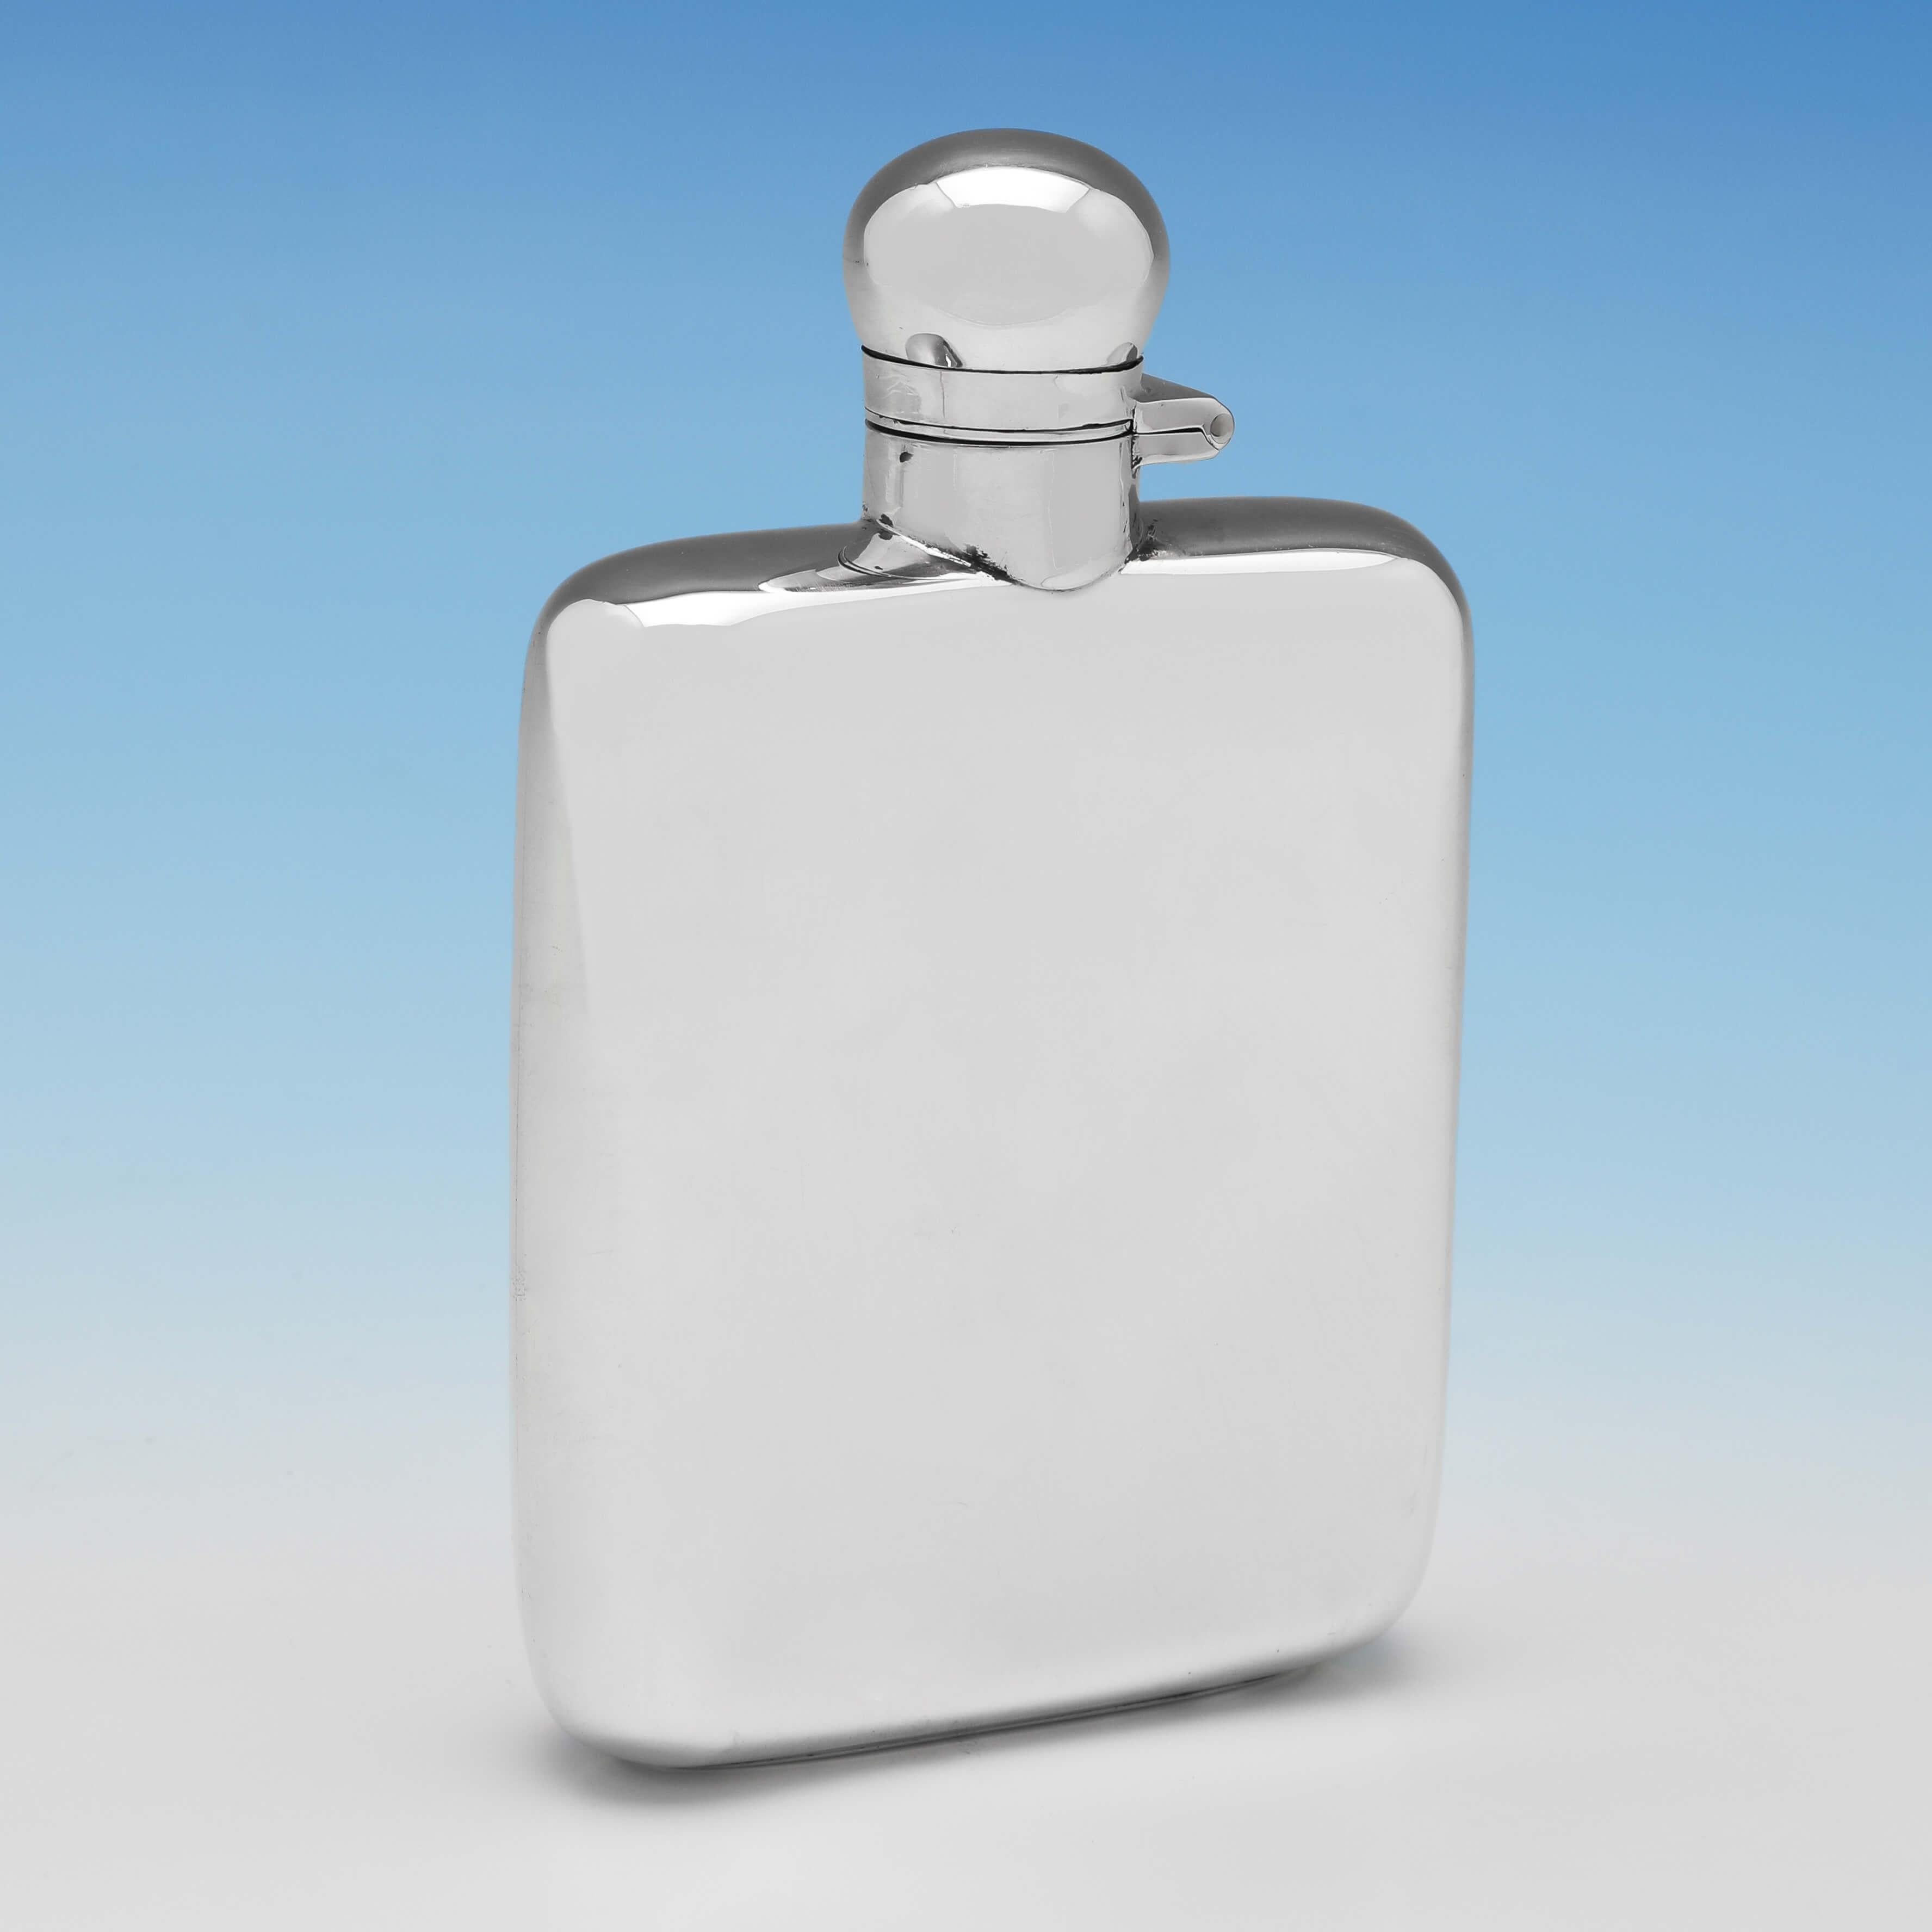 Hallmarked in Sheffield in 1923 by James Dixon & Sons, this handsome, Sterling Silver Hip Flask, is plain in style and features a bayonet cap. The hip flask measures 5